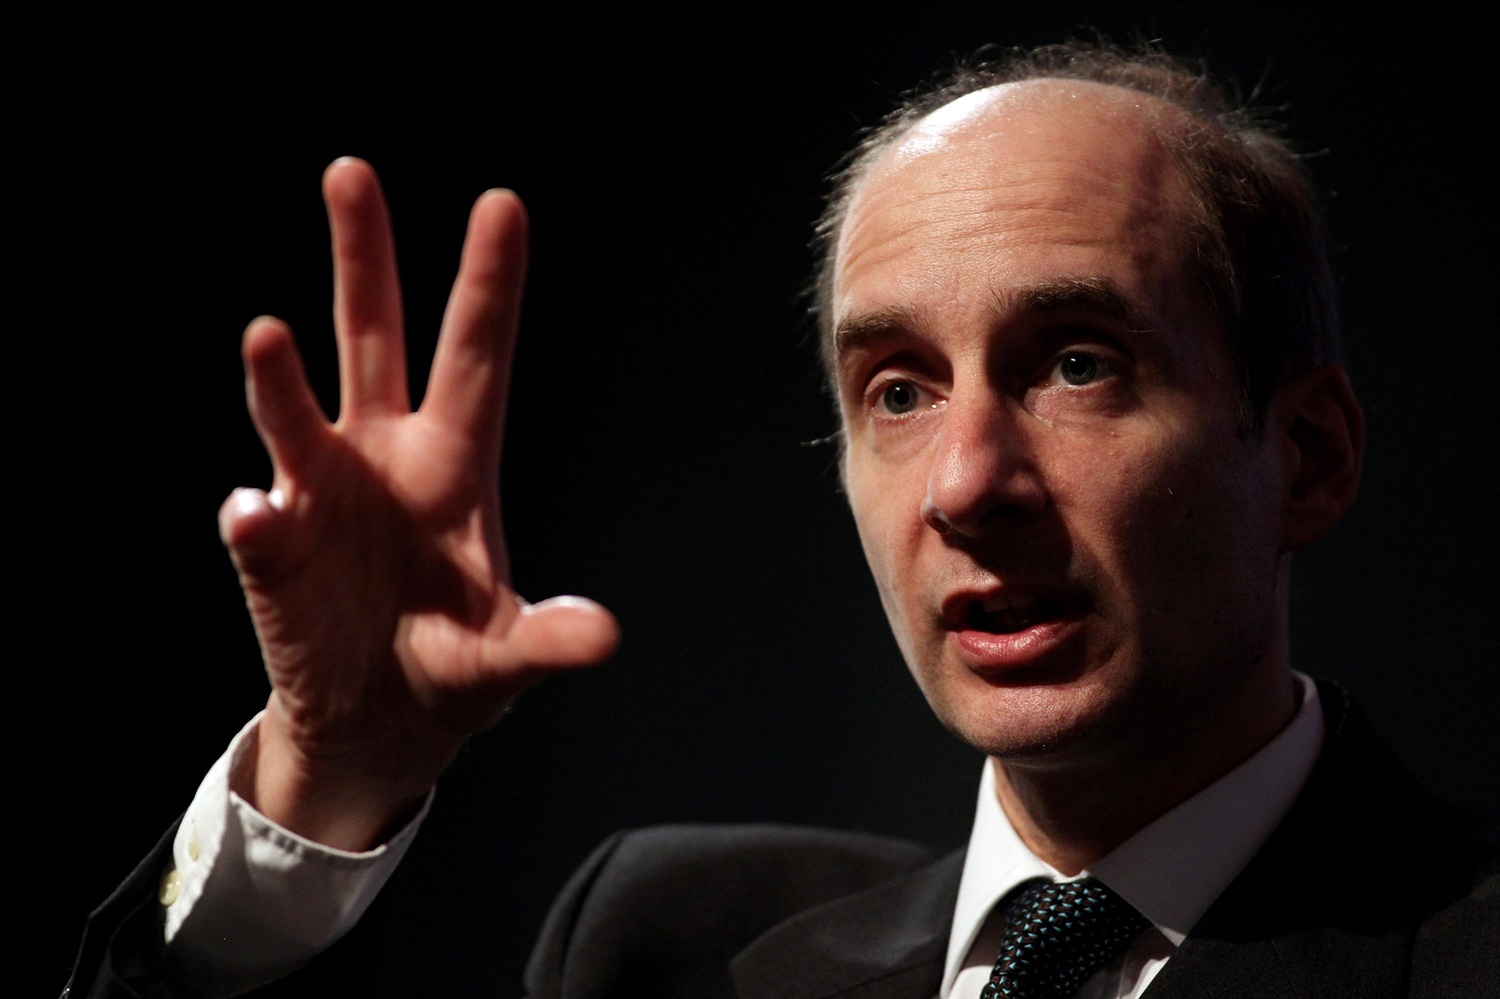 Adonis urges supply chain to ‘not be distracted by headlines’ and push on with HS2